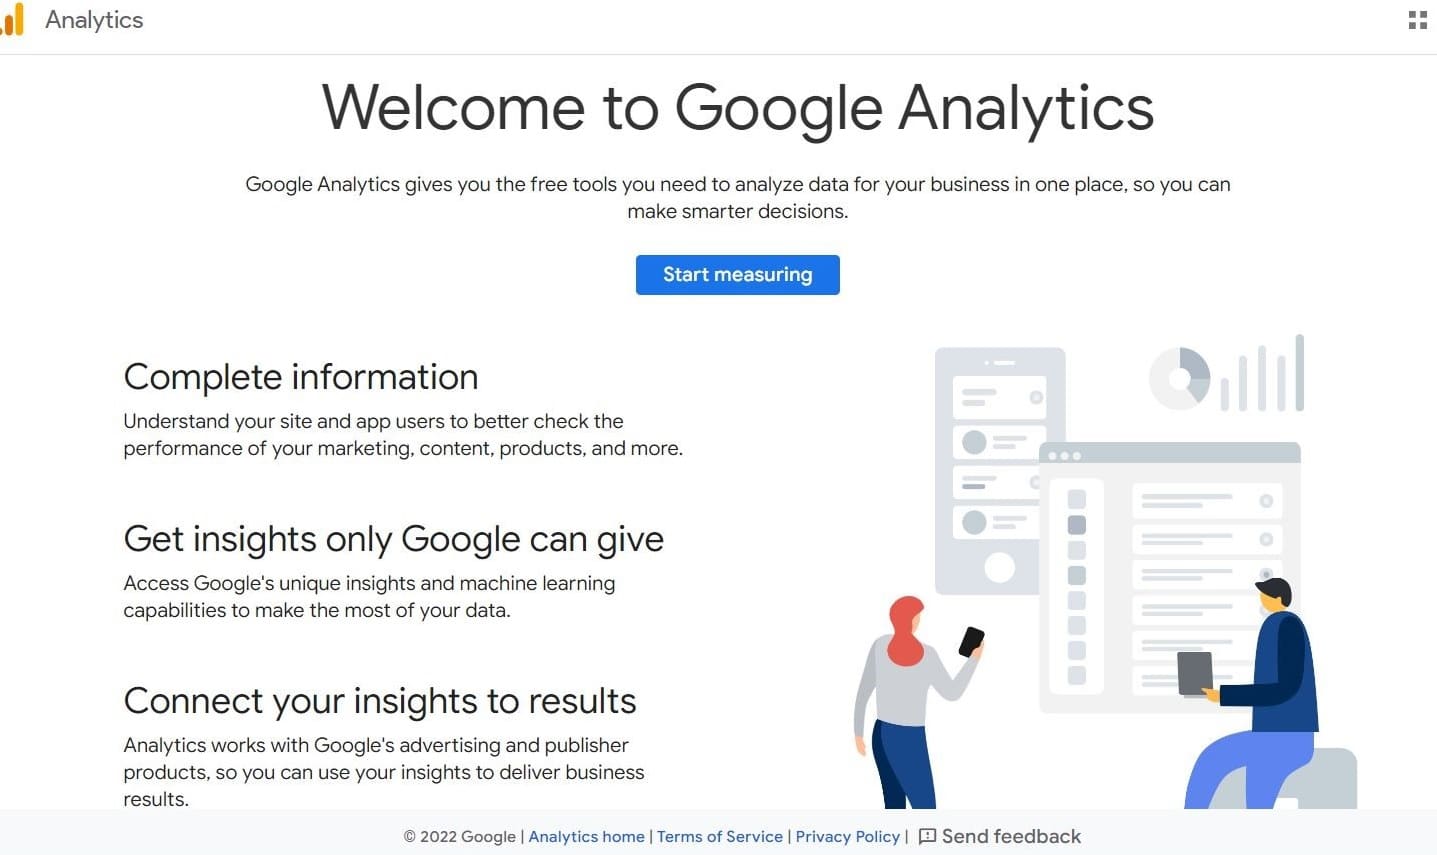 L’homepage di Google Analytics con le categorie "Complete information," "Get insights only Google can give," and "Connect your insights to results".